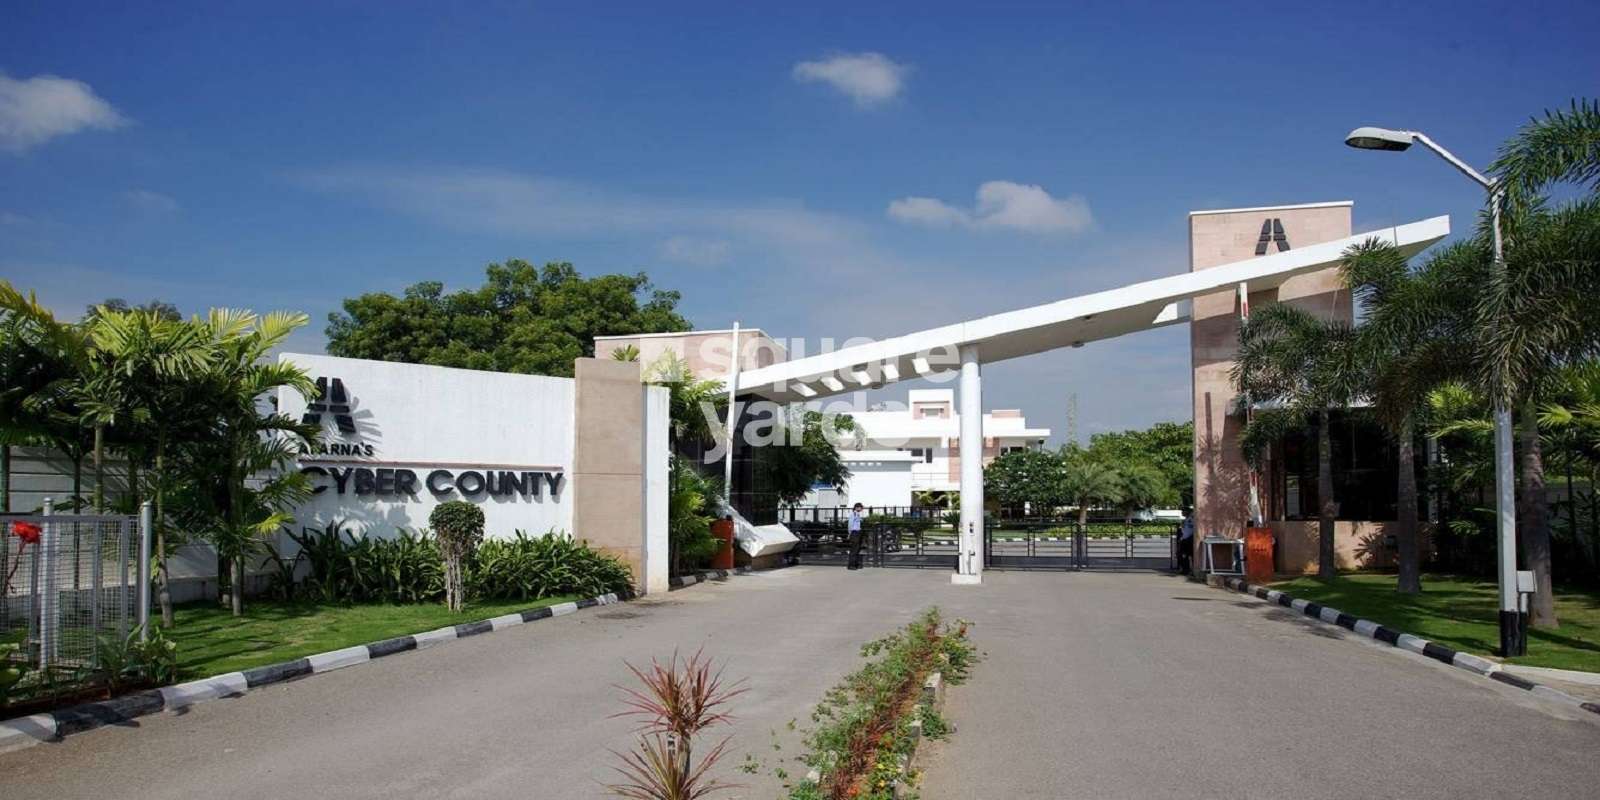 aparna cyber county entrance view6